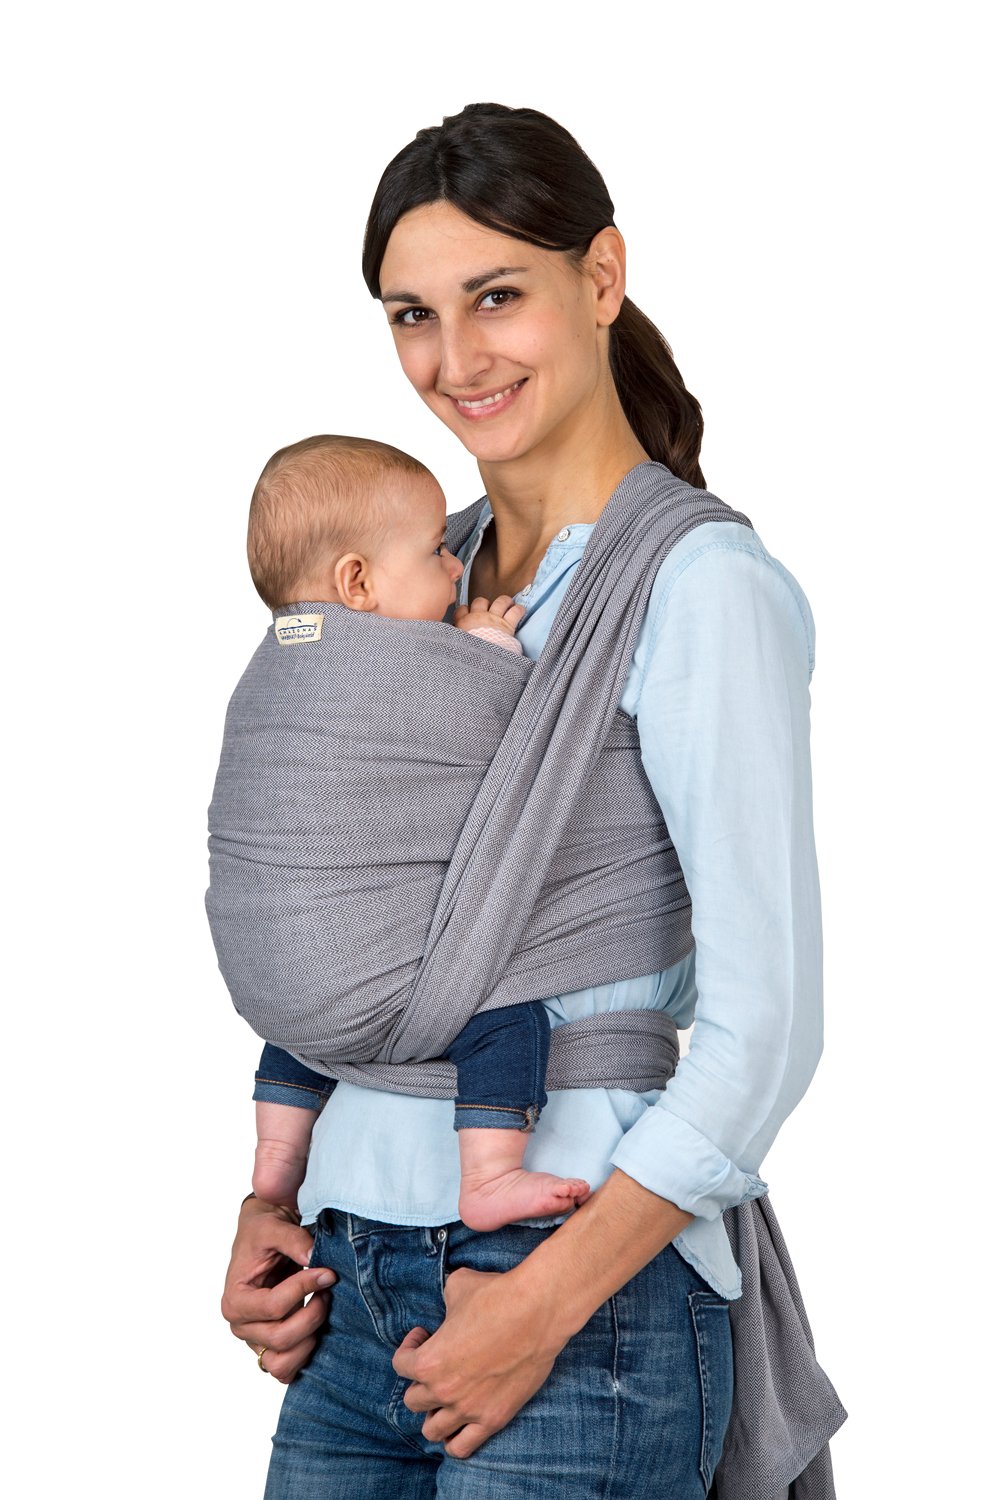 AMAZONAS Baby Sling Carry Sling Grey - Test Winner at Stiftung Warentest with Top Score 1.7-450 cm 0-3 Years to 15 kg in Grey